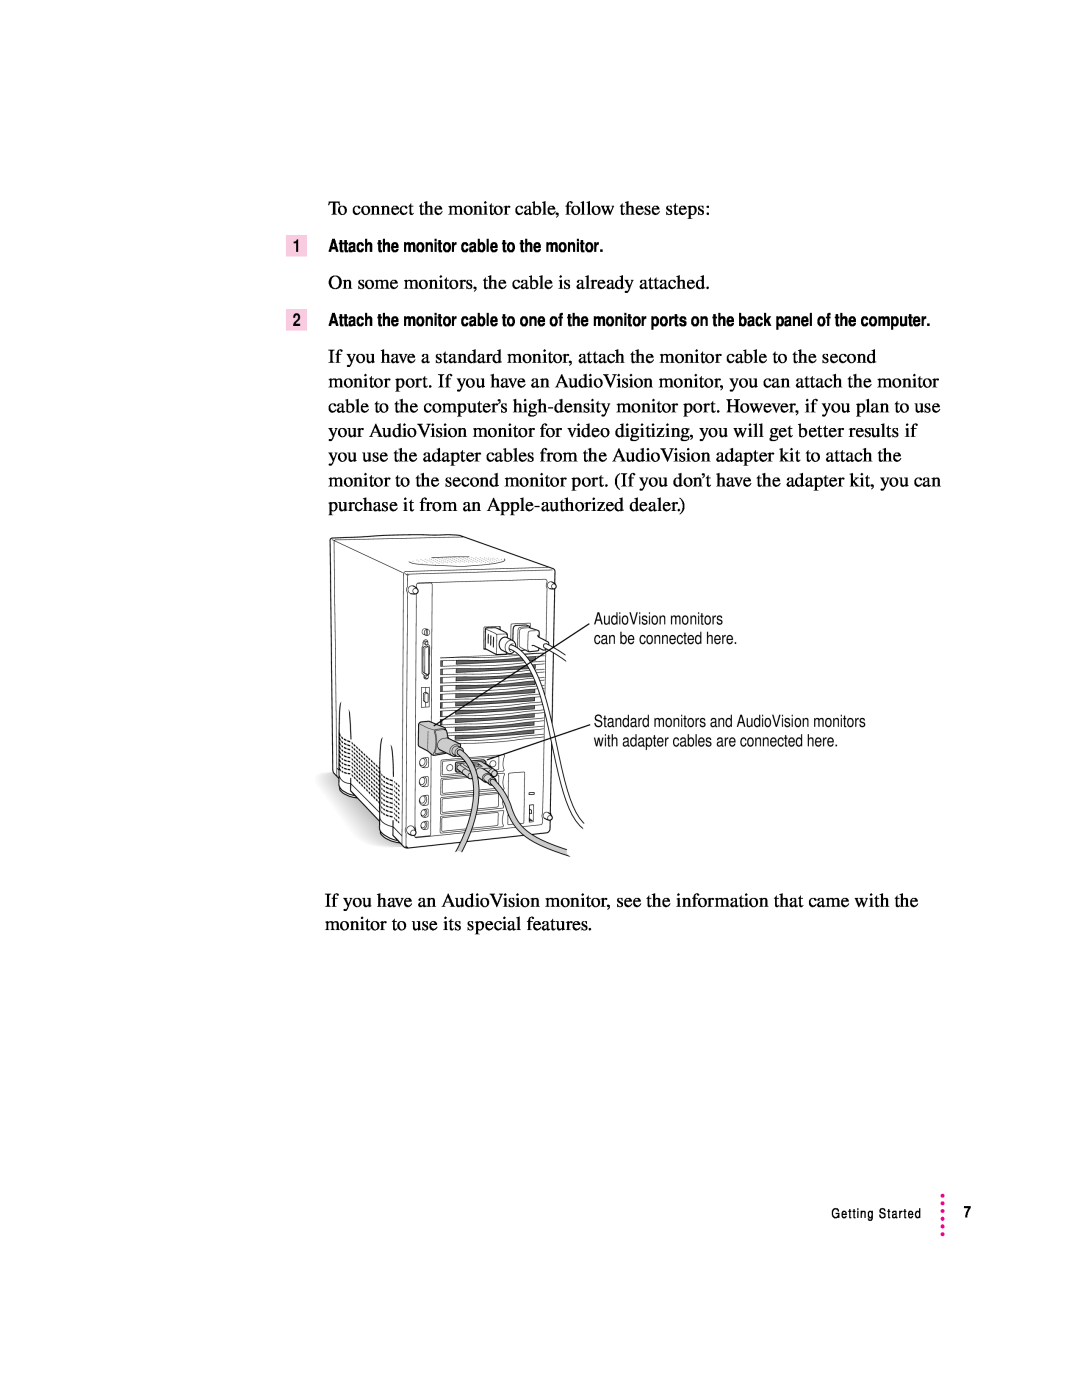 Apple 8100 Series manual To connect the monitor cable, follow these steps 